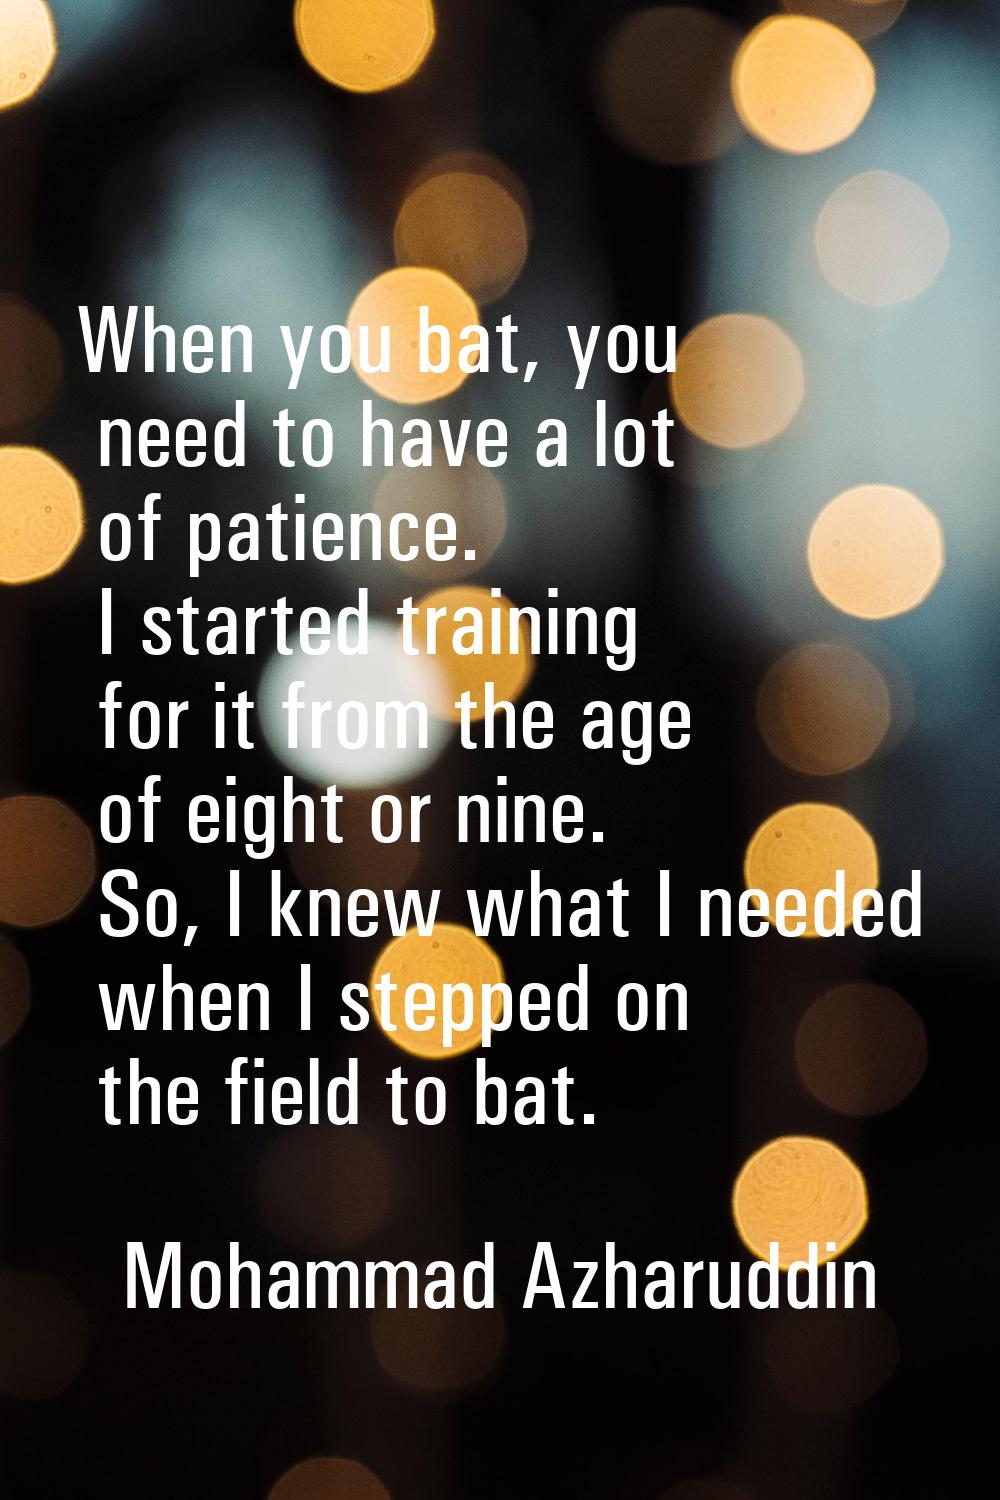 When you bat, you need to have a lot of patience. I started training for it from the age of eight o